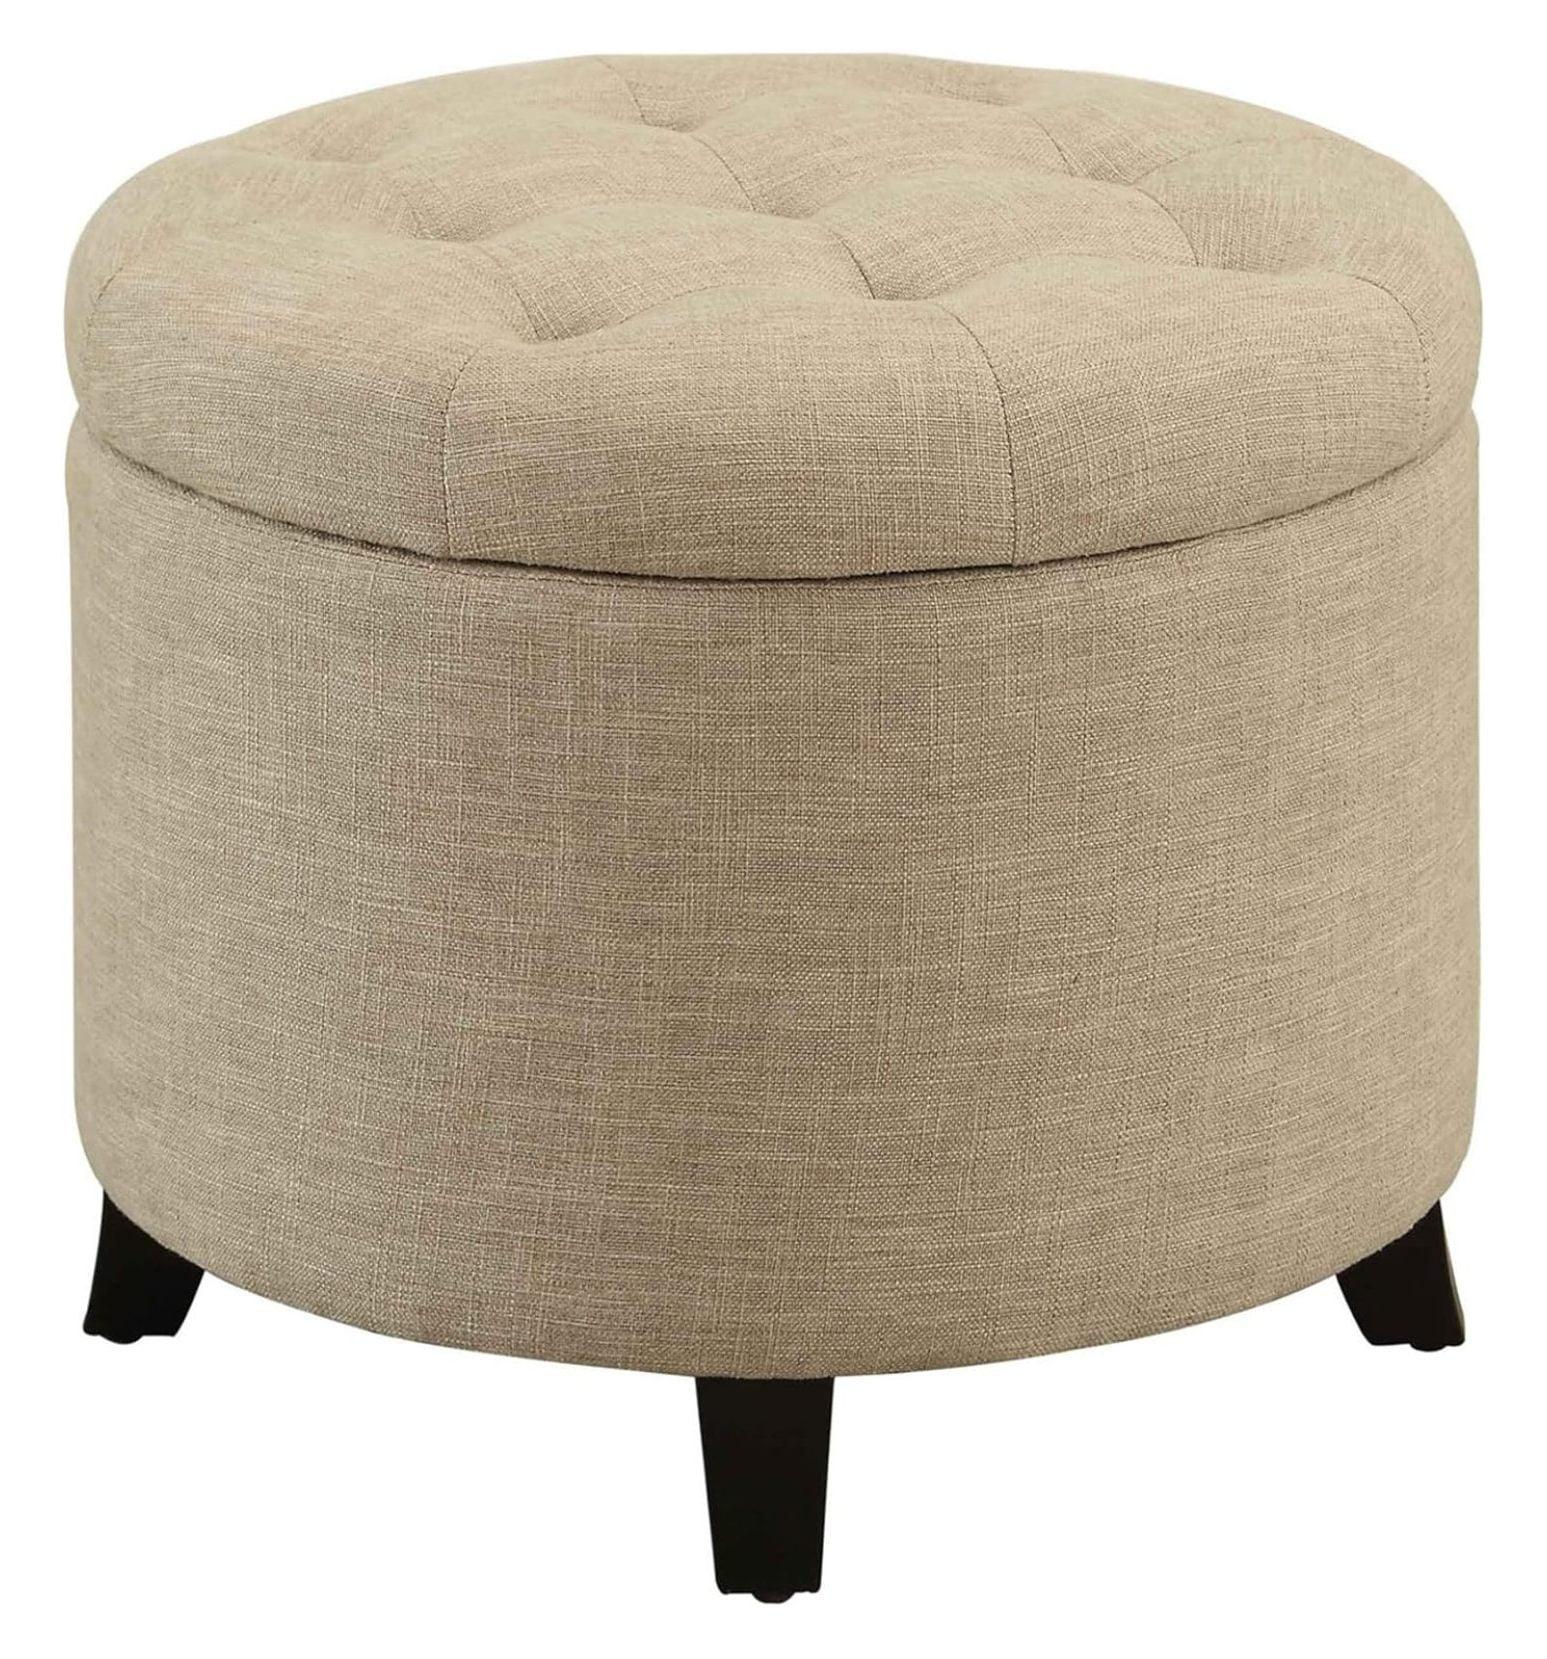 Tan Fabric Tufted Round Ottoman with Concealed Storage, 20"